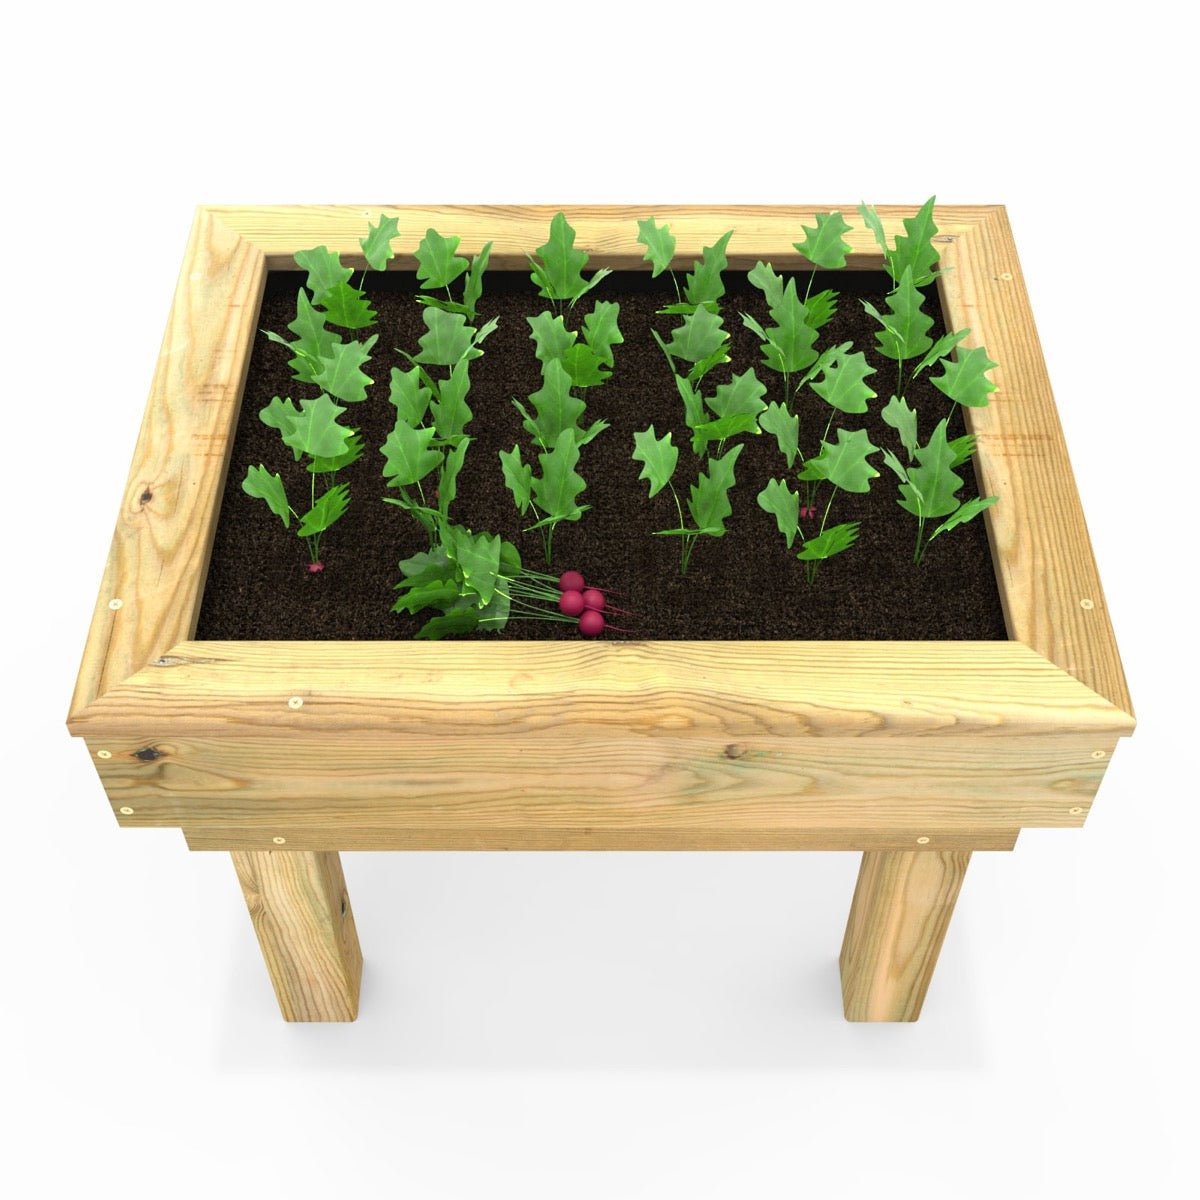 Rebo Wooden Learn and Grow Single Planter